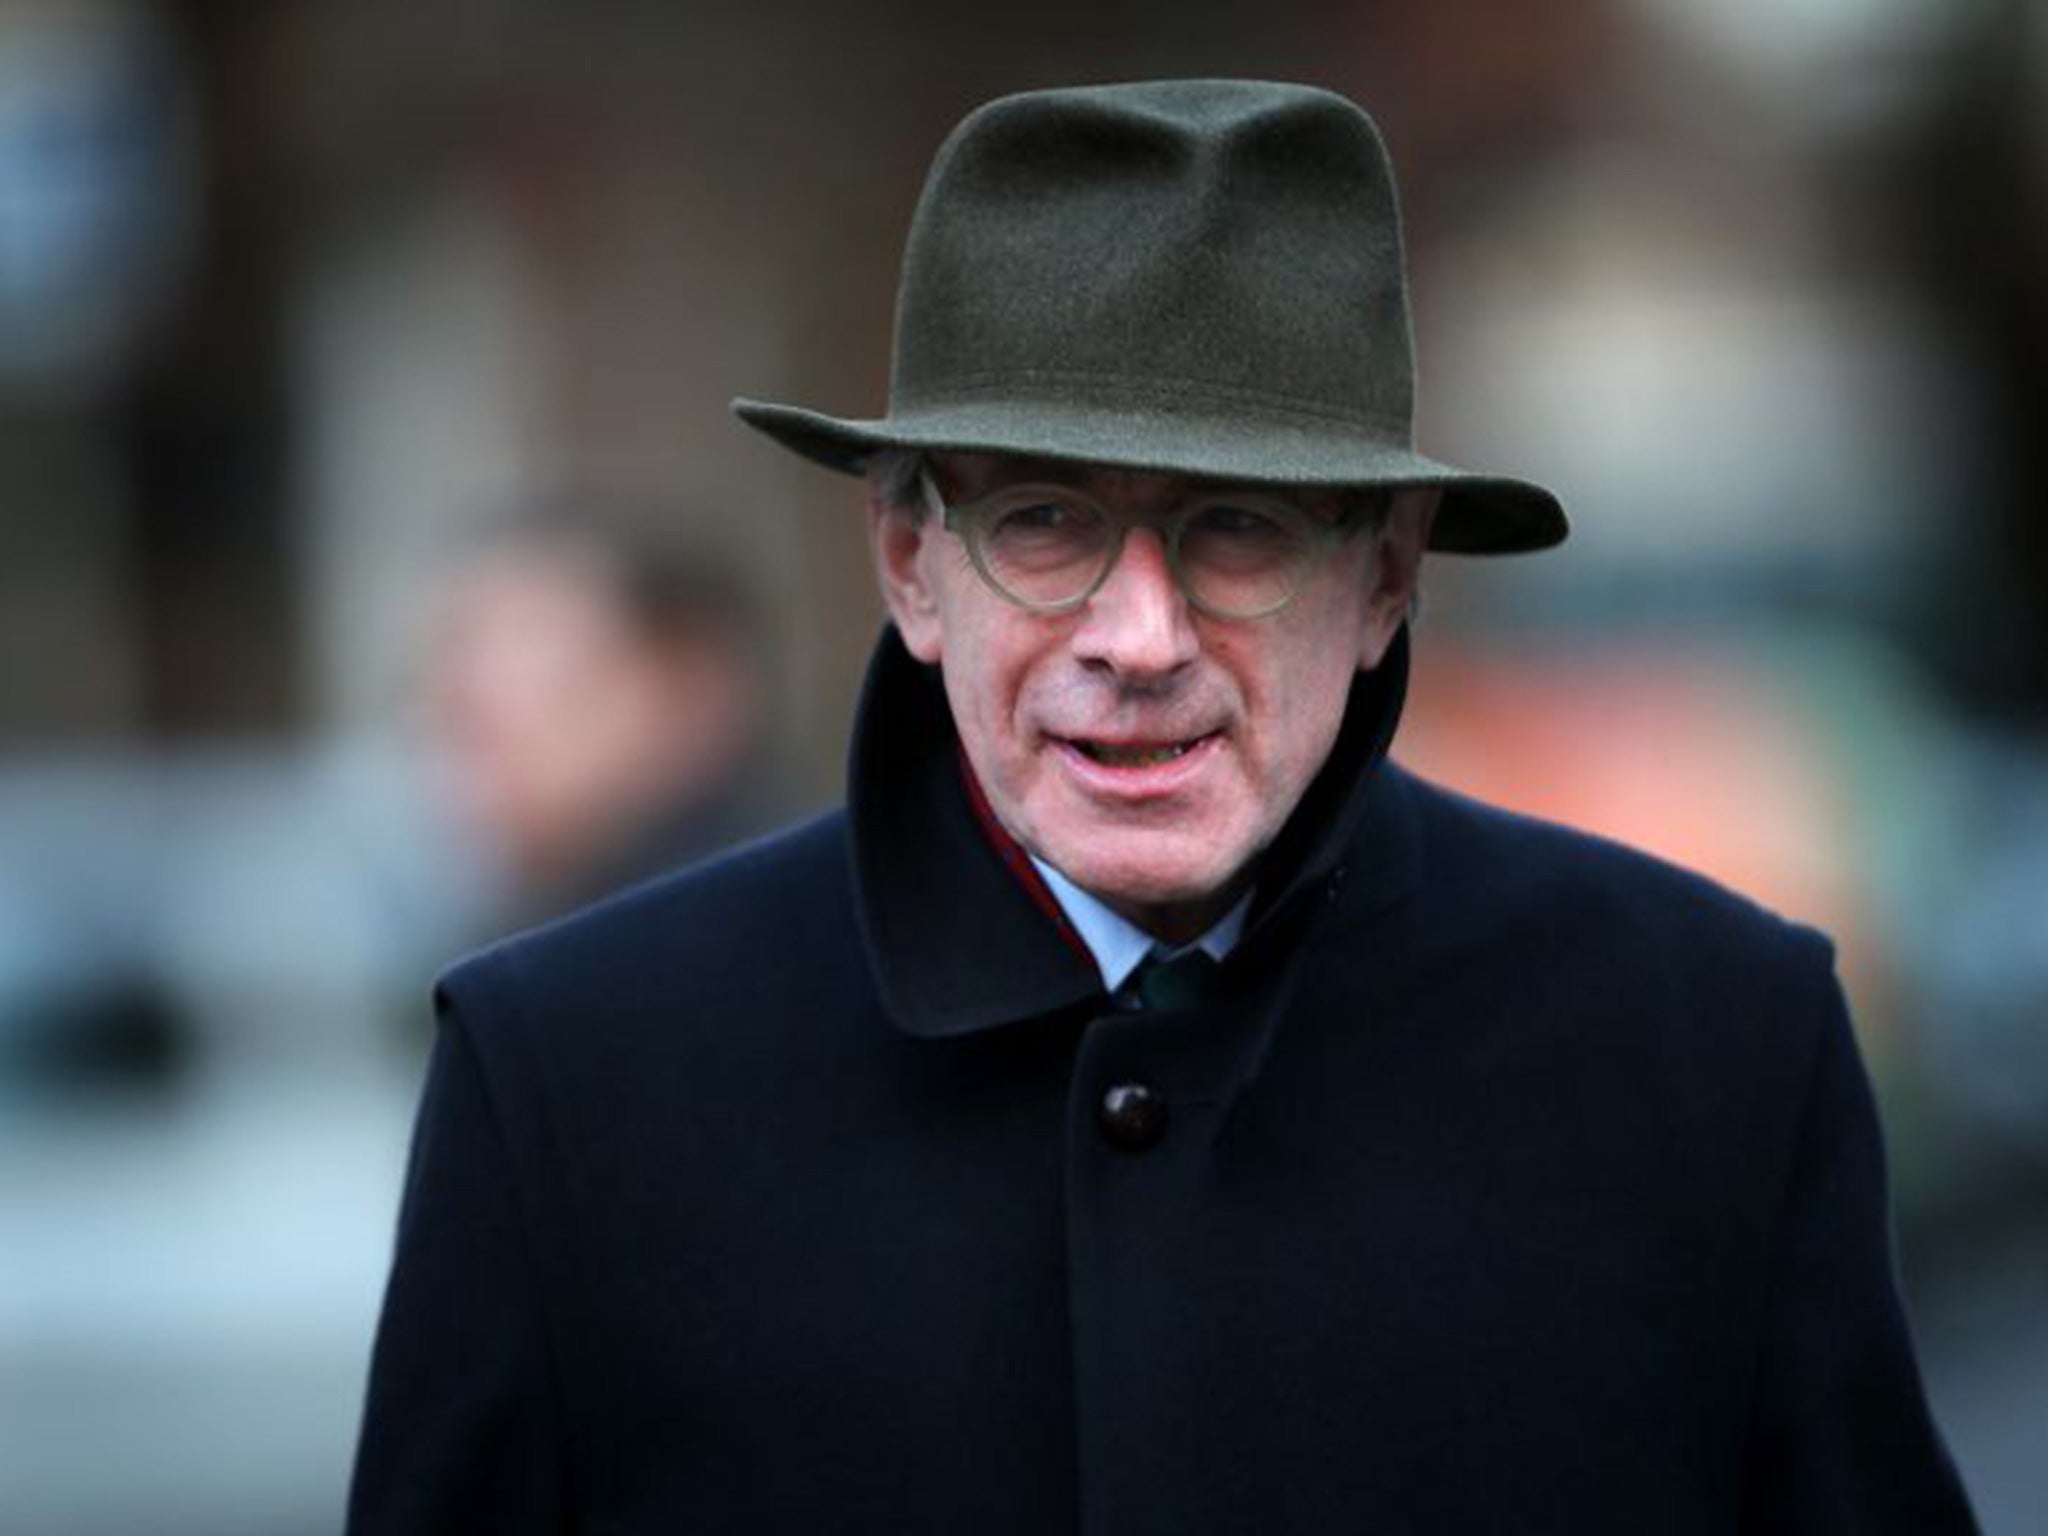 Sir Malcolm Rifkind leaves Parliament on February 23, 2015 in London